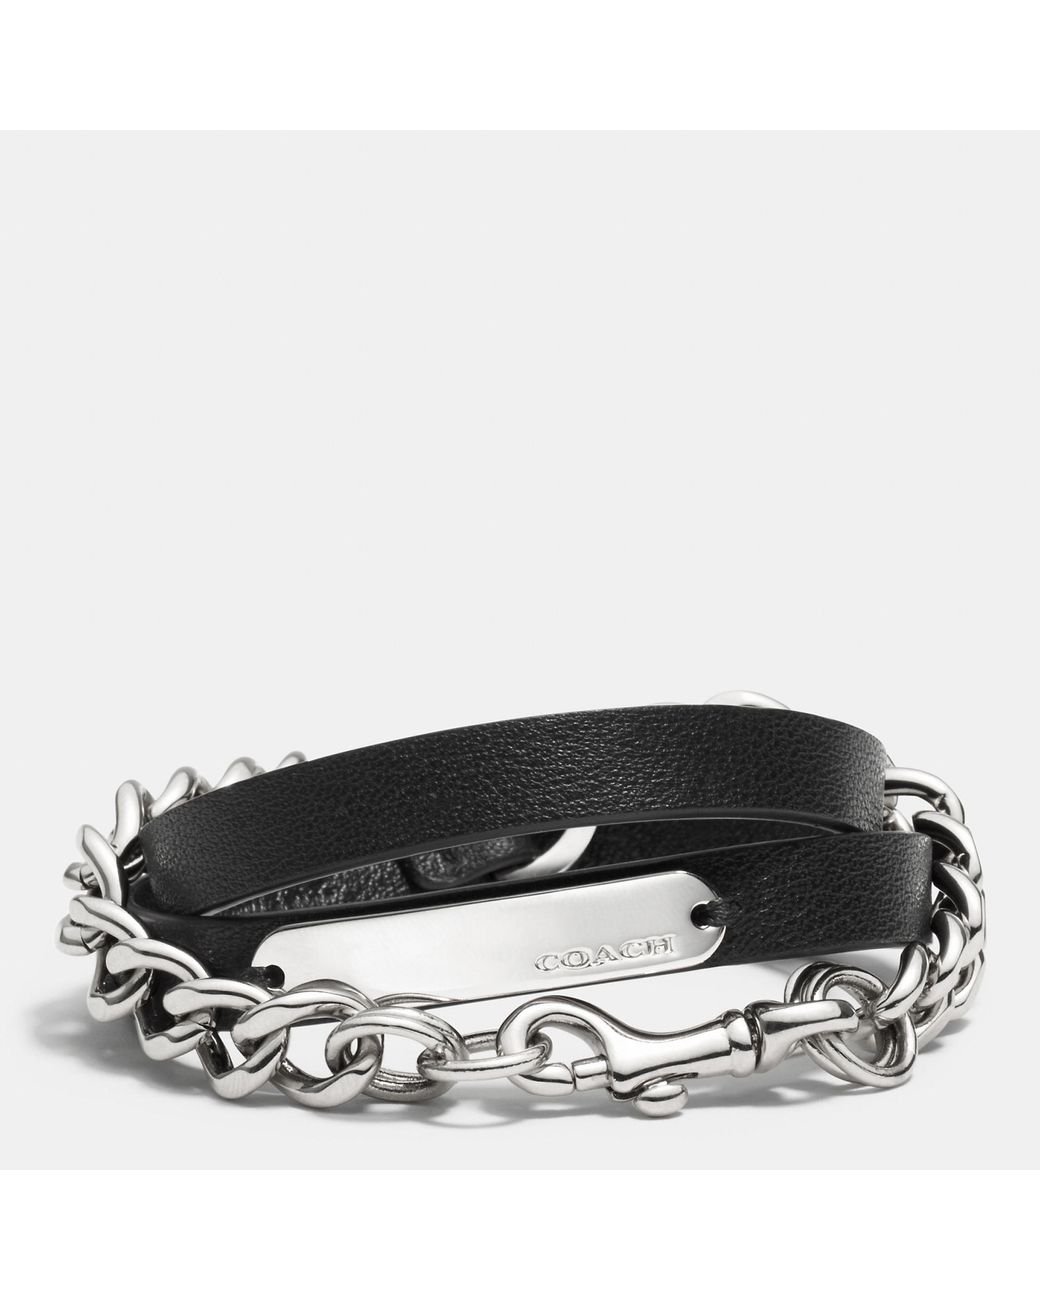 Coach McFall Engraved Silver Bar Chain Bracelet | Tales of Luv'd Ones